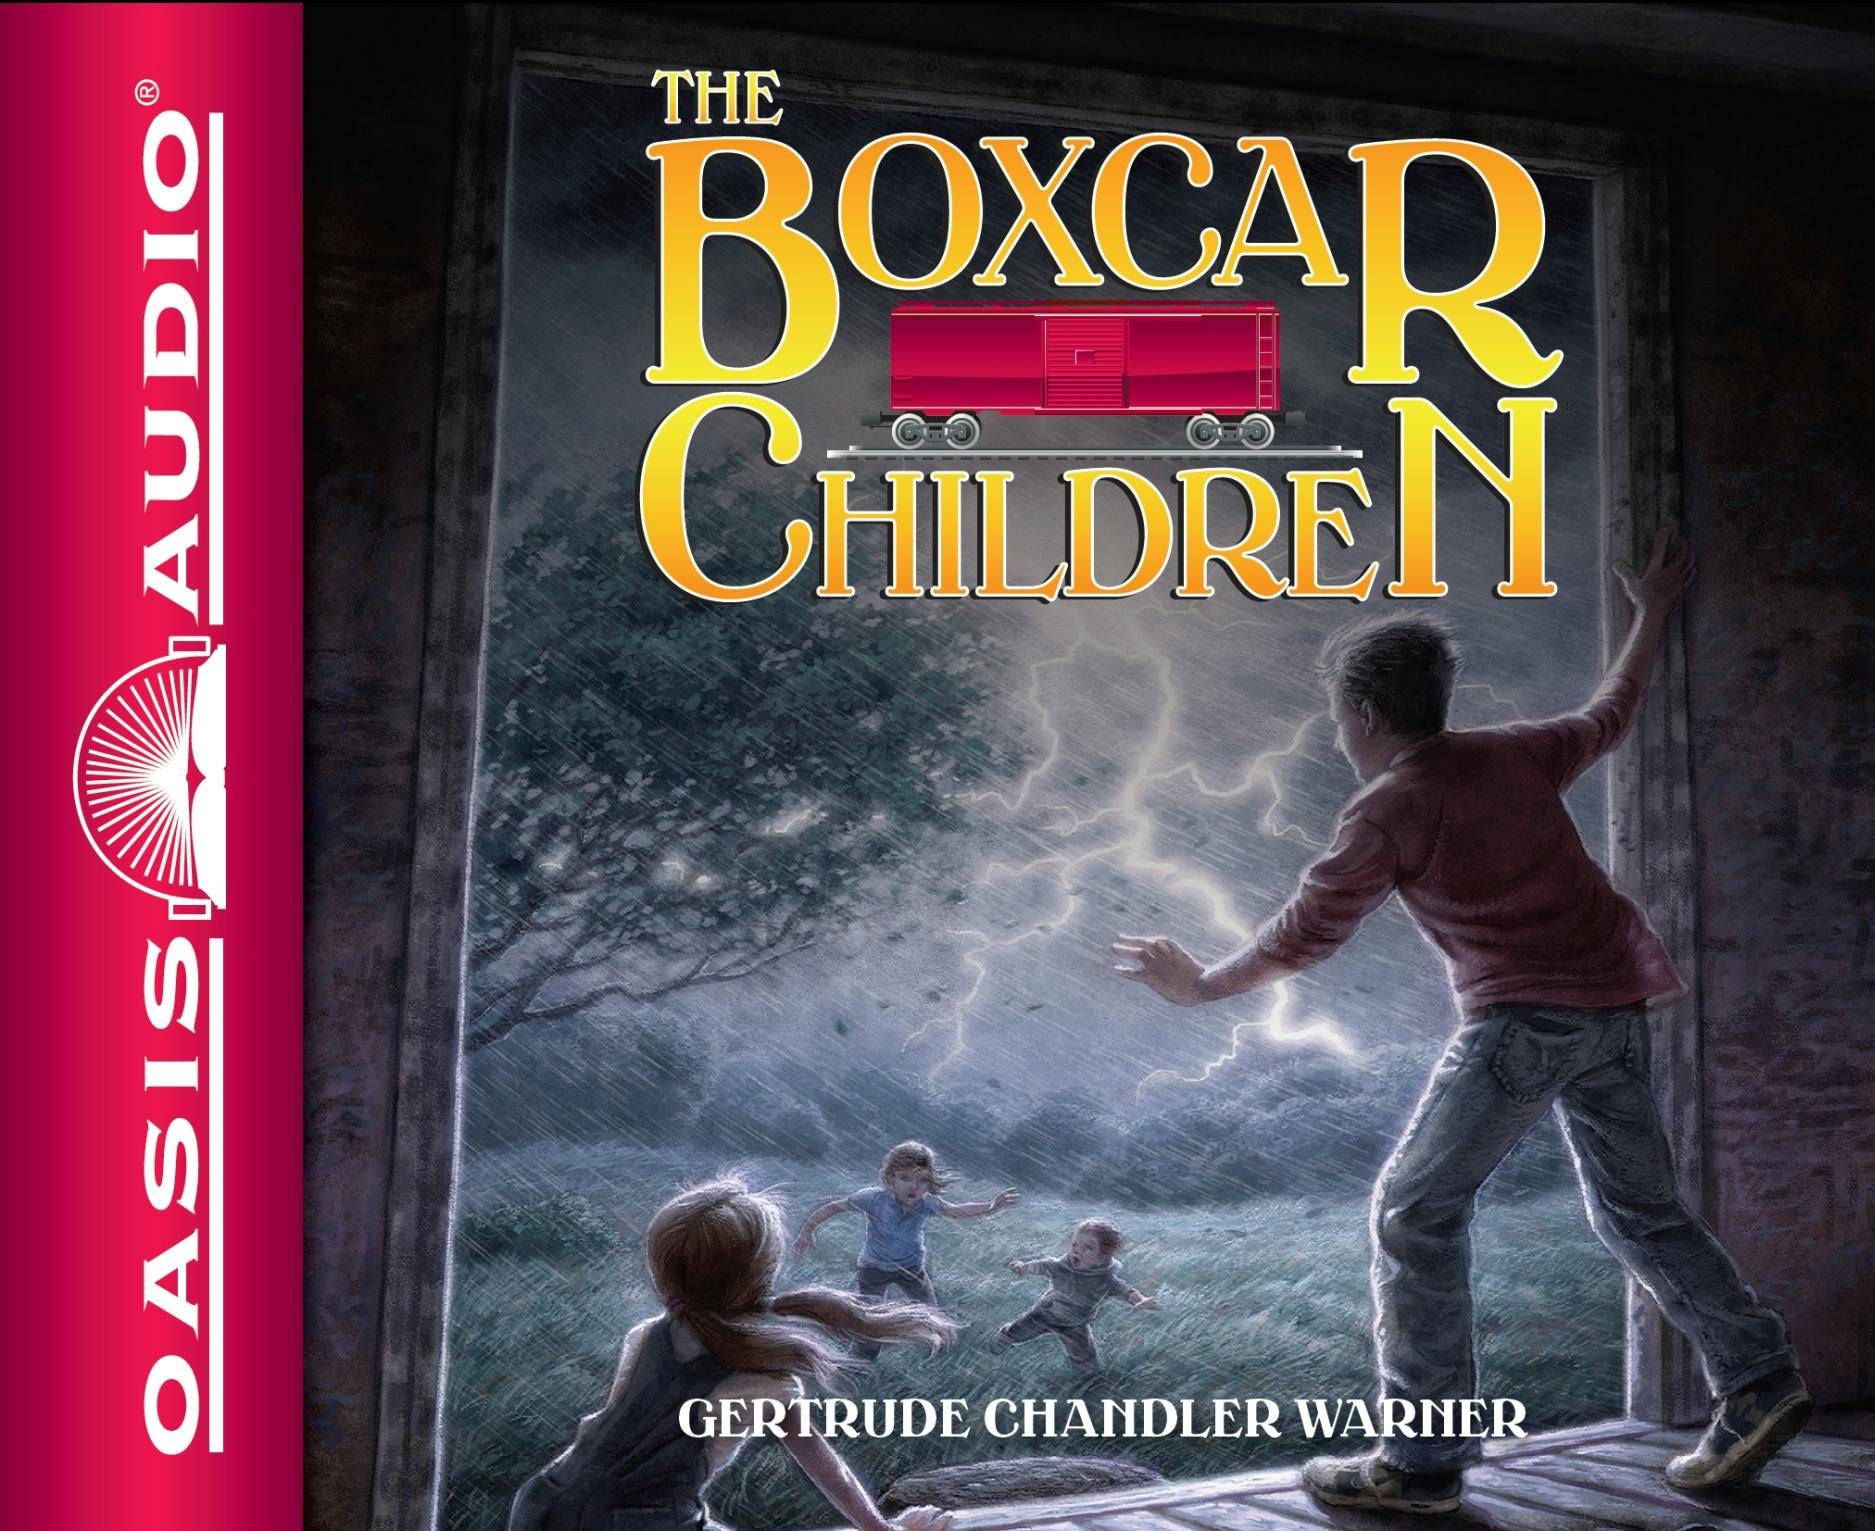 The Boxcar Children: The Boxcar Children Mysteries, Book 1 - undefined